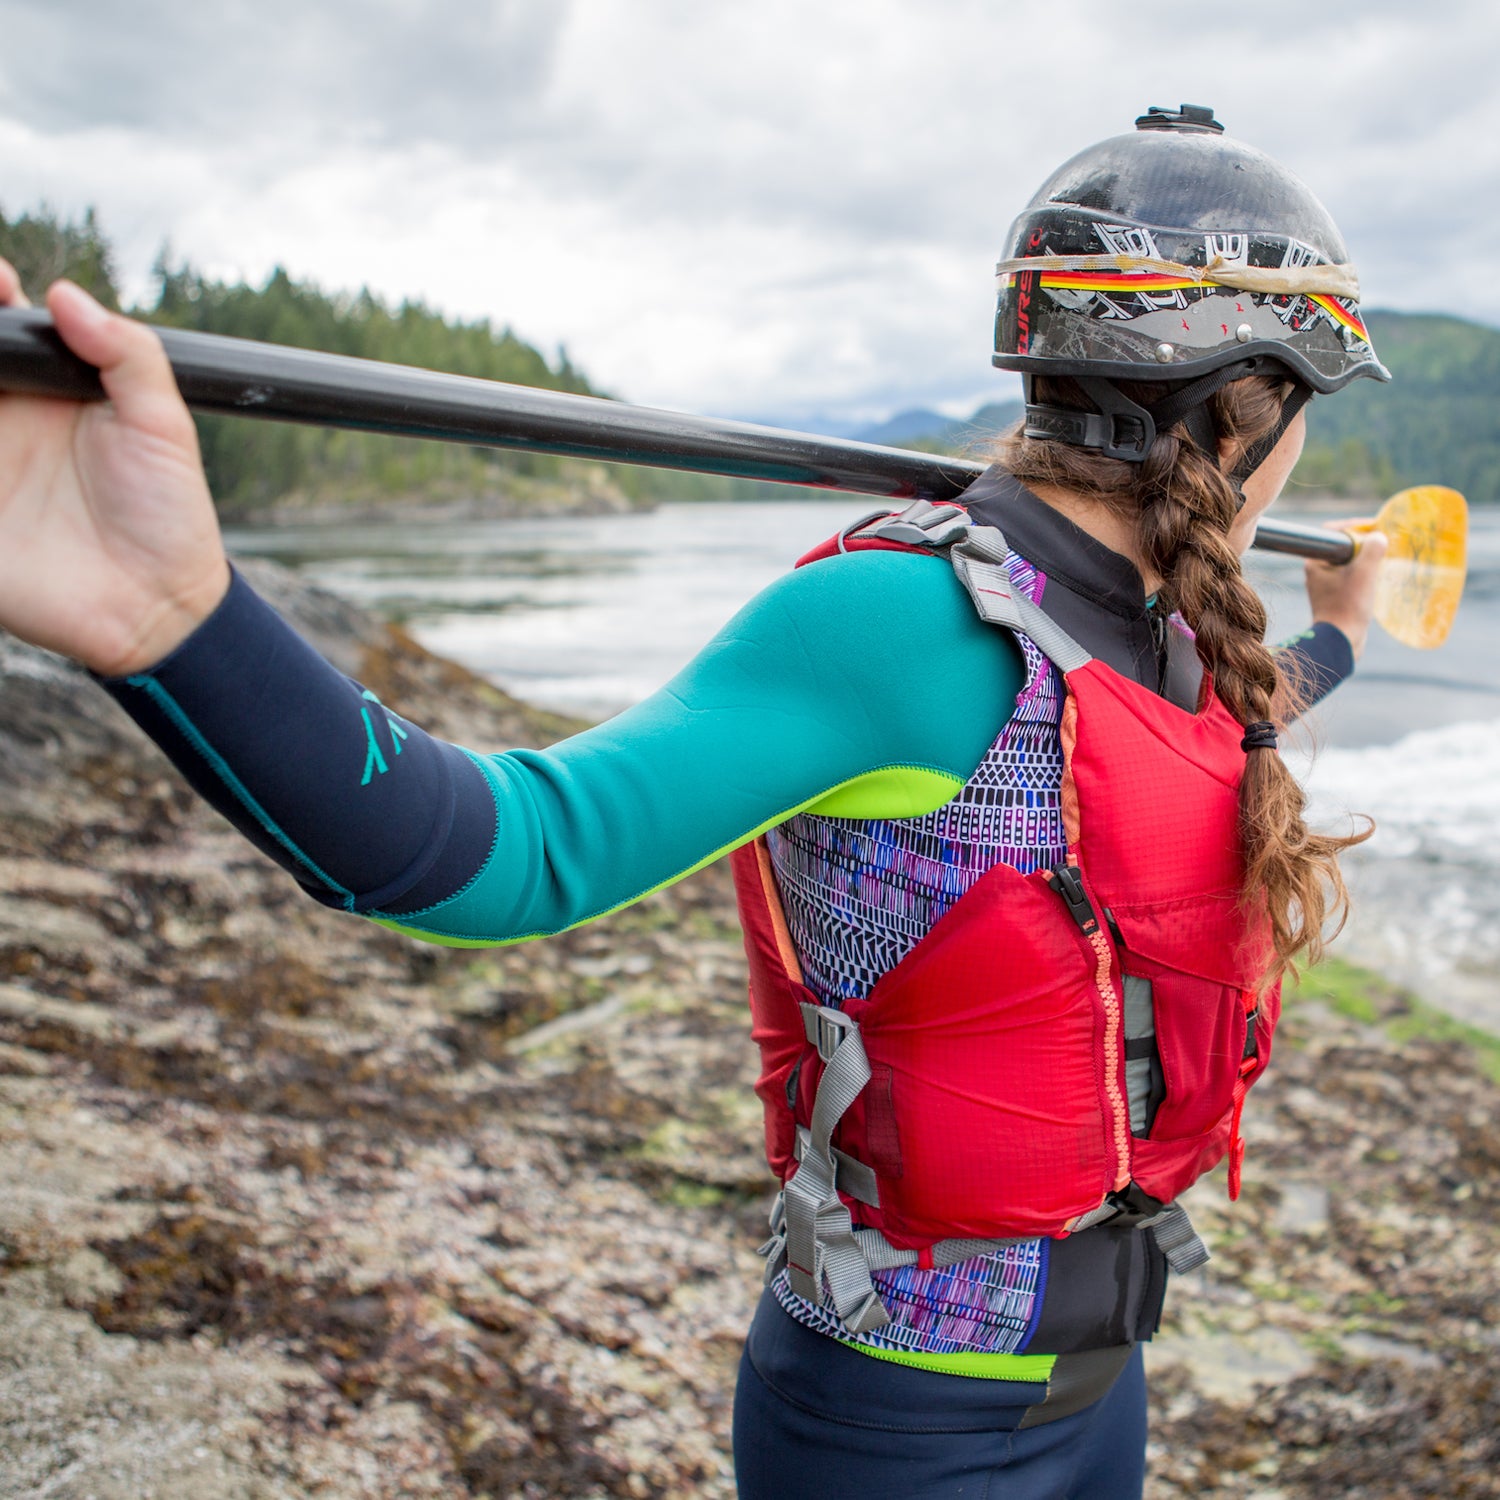 Best Fishing Life Vest: The Top 7 Fishing Life Jackets in 2022